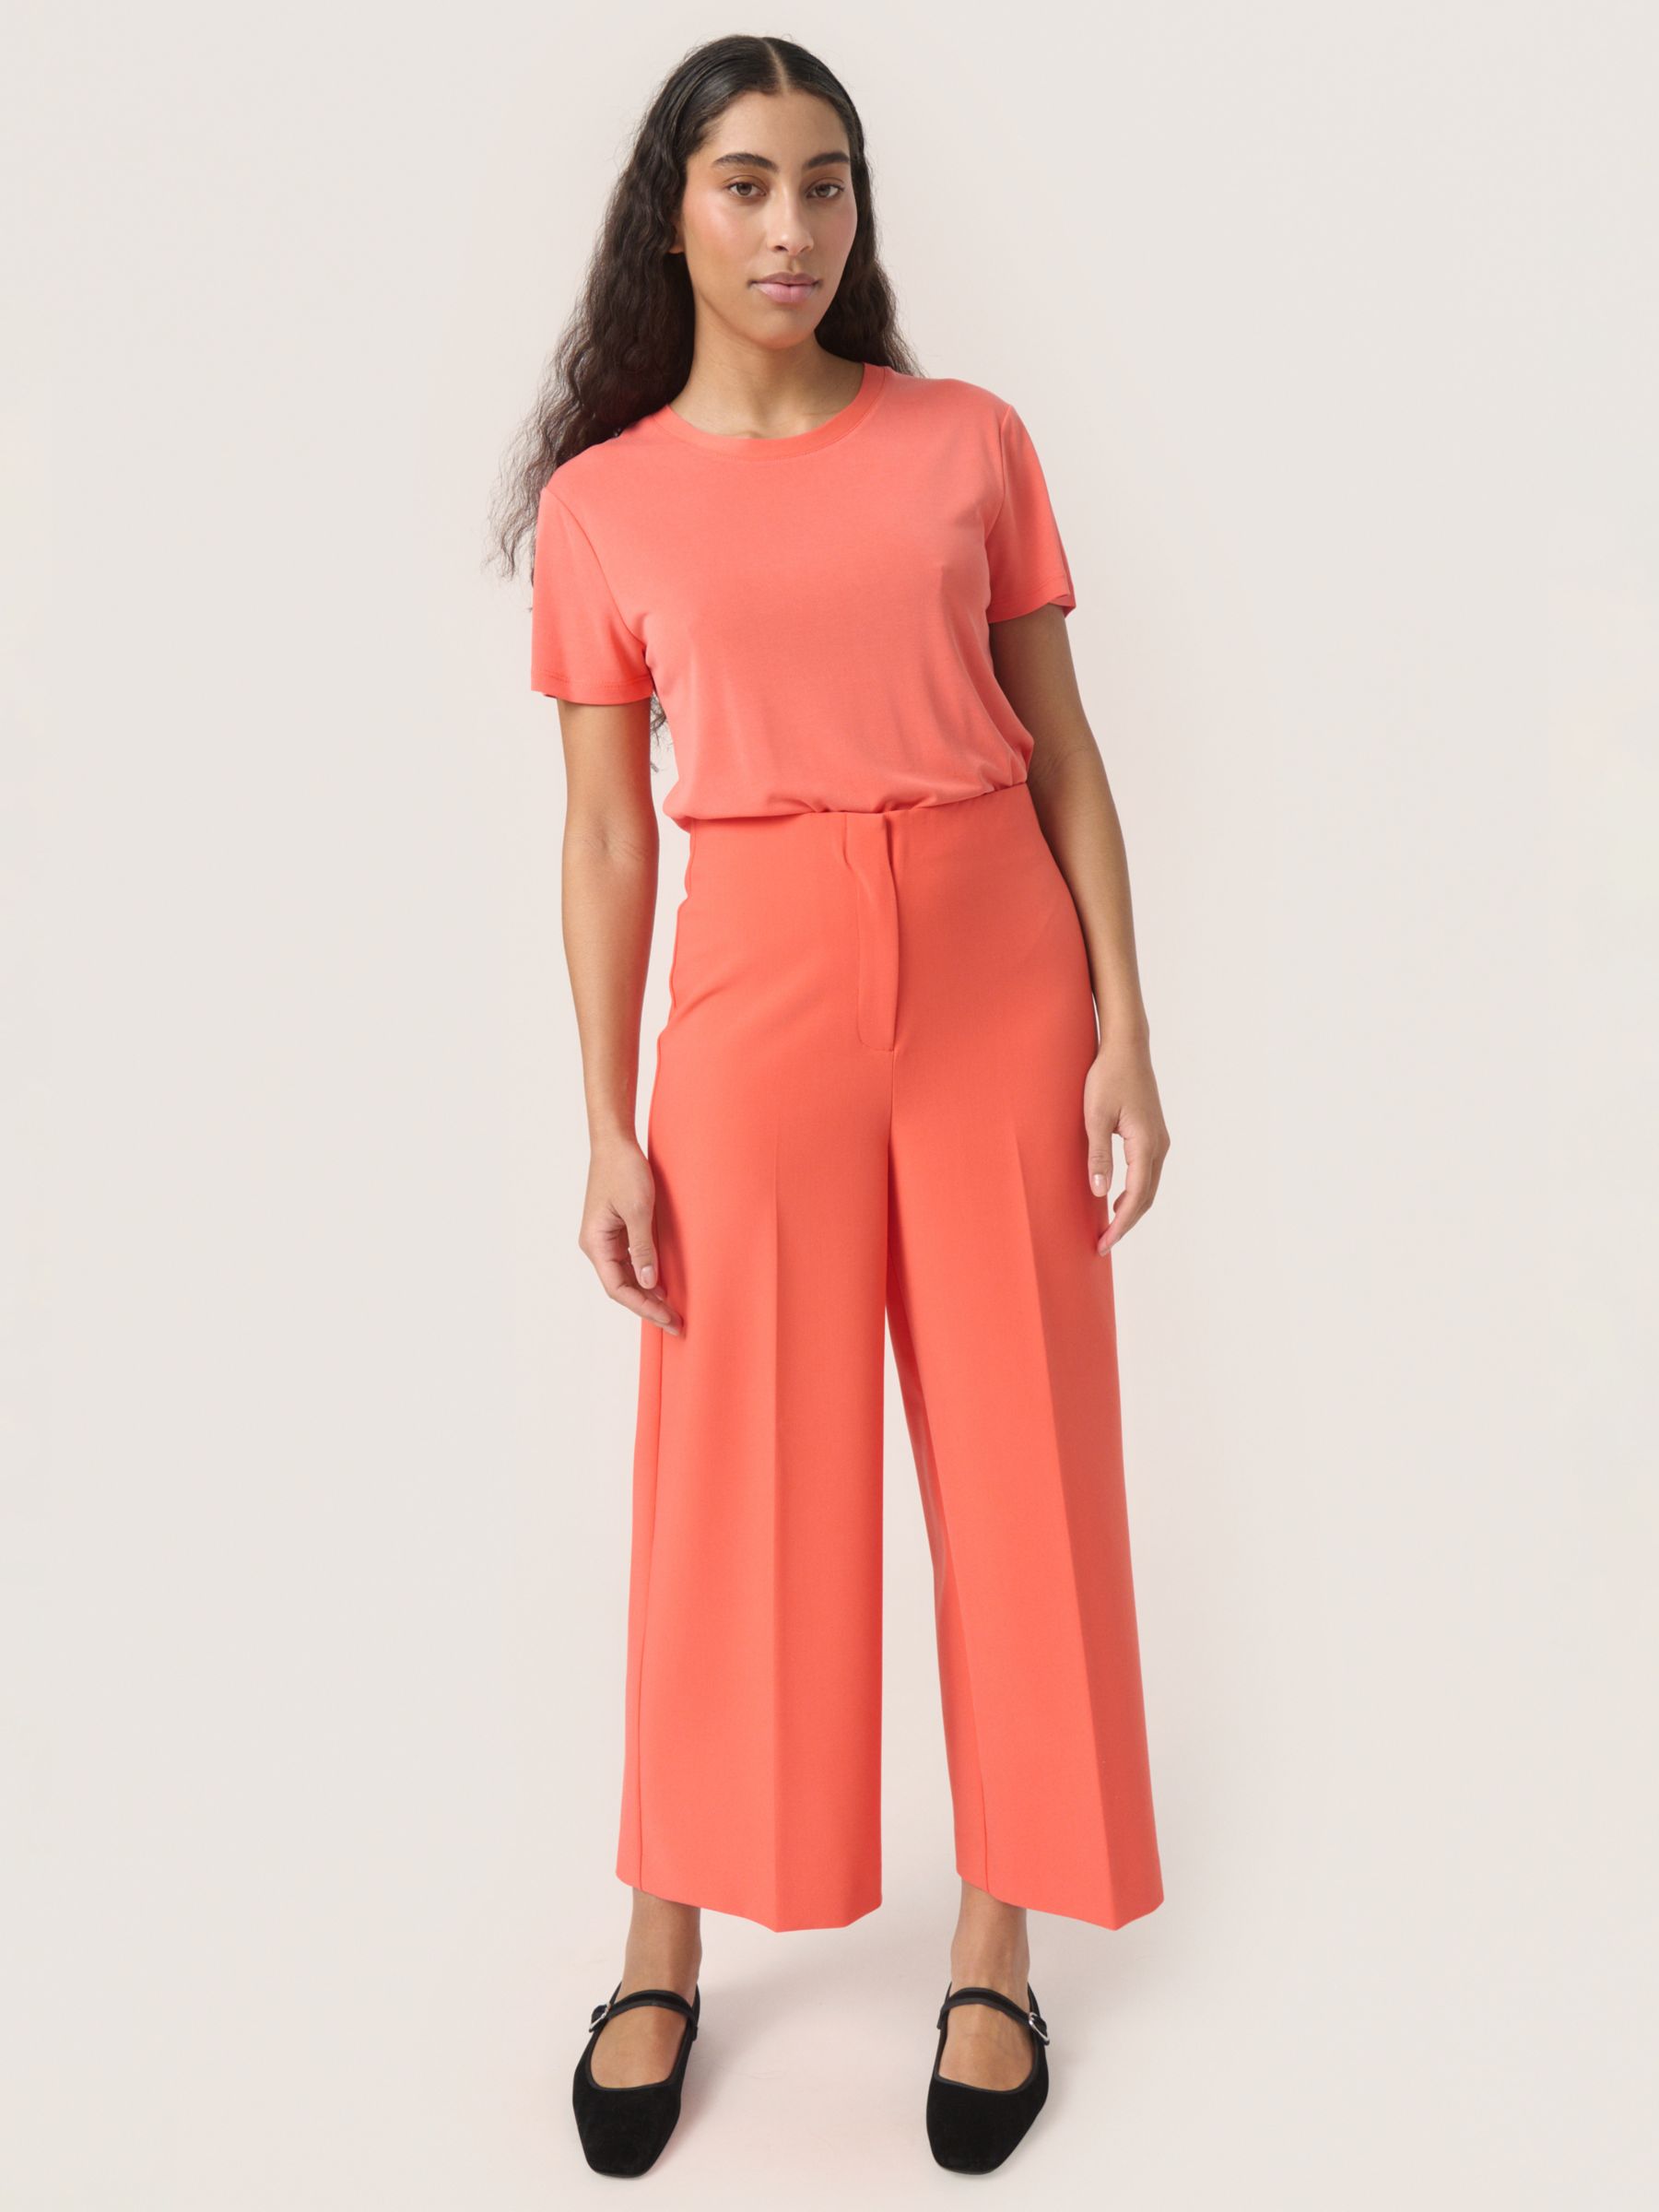 Buy Soaked In Luxury Corinne High Waist Wide Legs Culottes Trousers Online at johnlewis.com